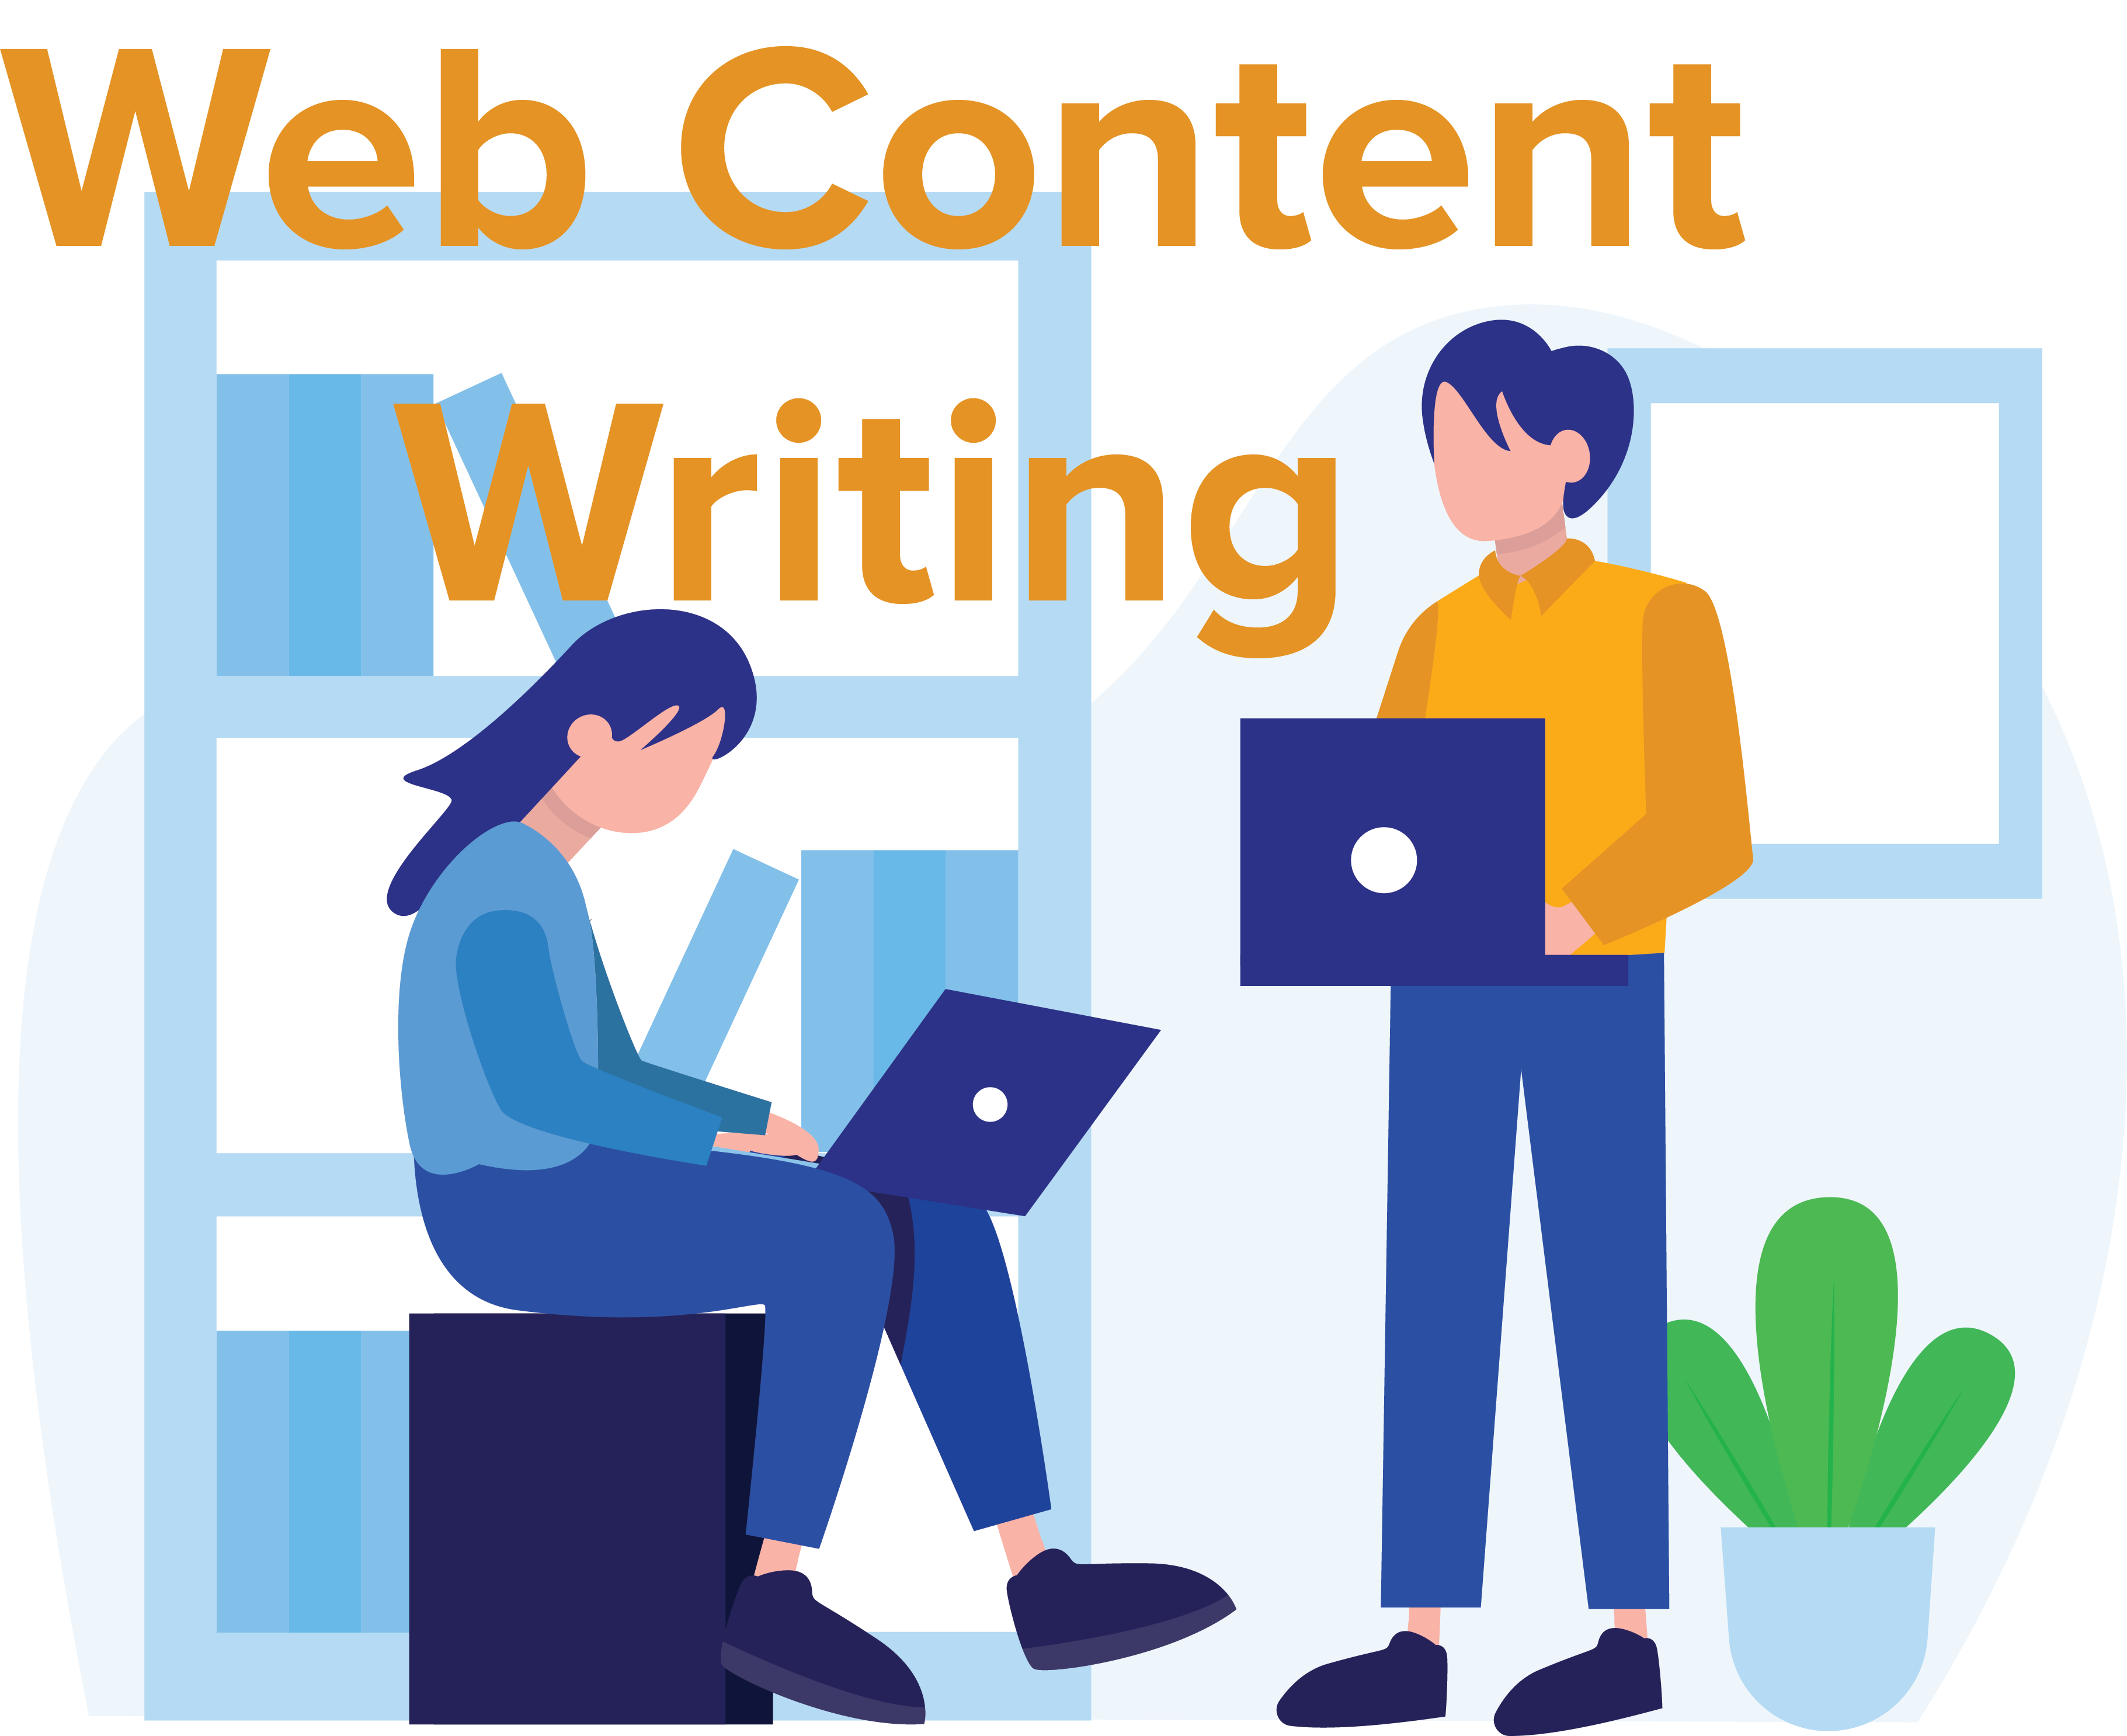 Write Unique Content for Your Website or Blog